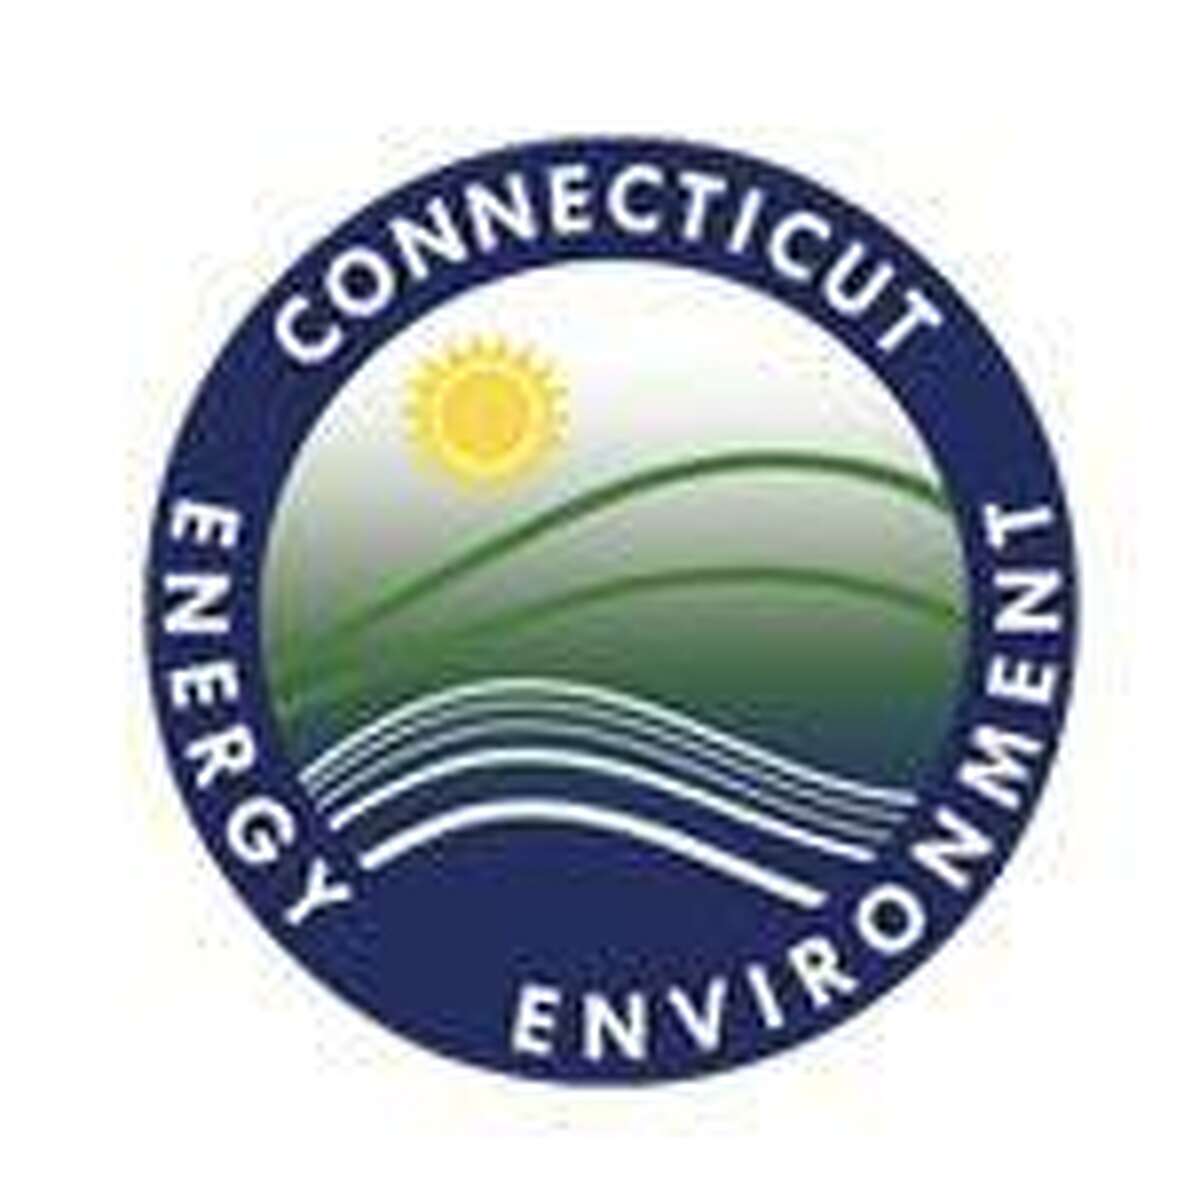 The Department of Energy and Environmental Protection Sunday identified two men killed in a Stonington boat crash.